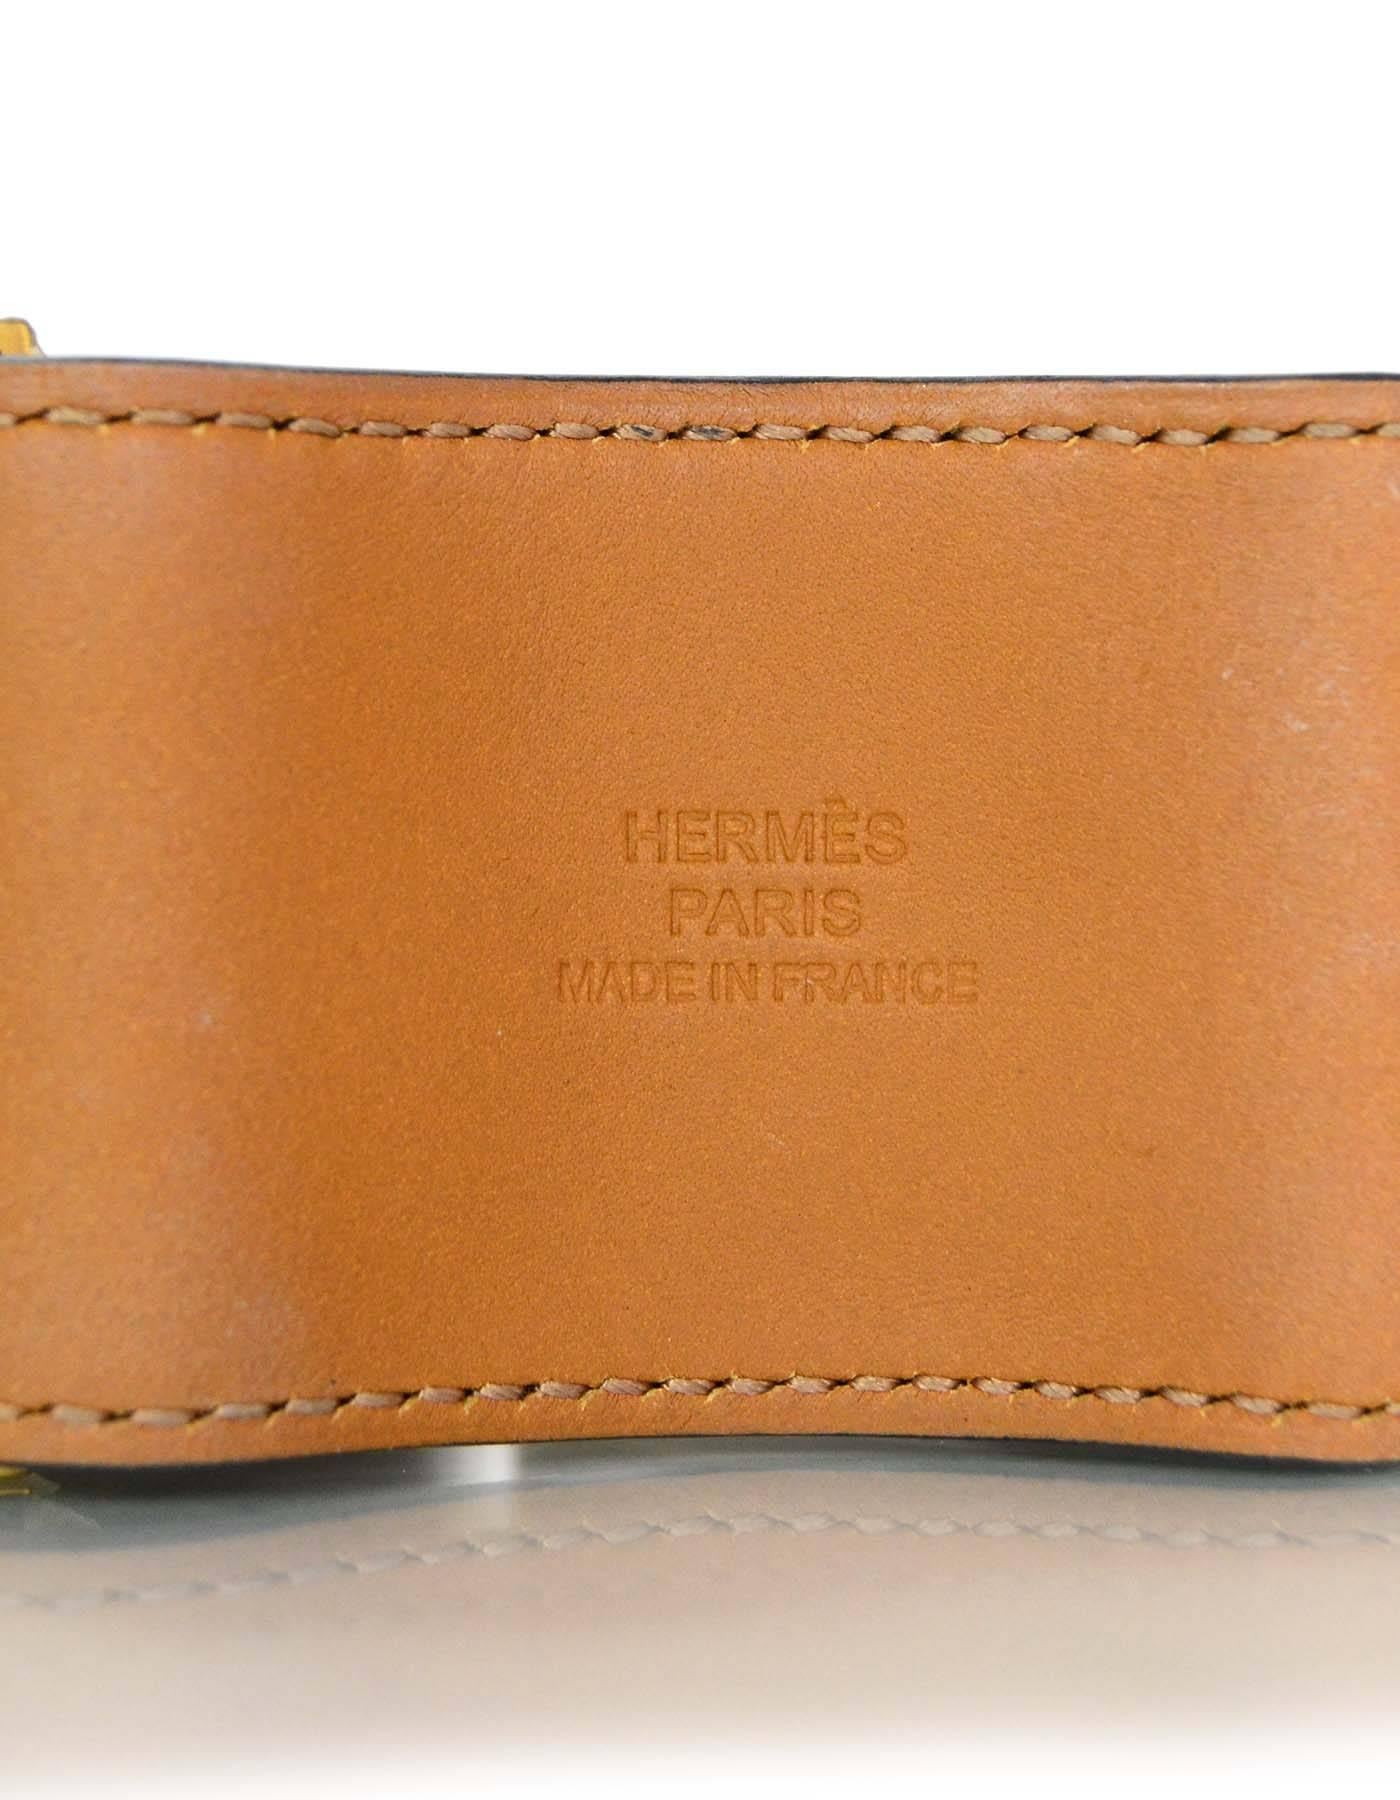 Hermes Black & Gold Collier de Chien CDC Cuff Bracelet sz S In Excellent Condition In New York, NY